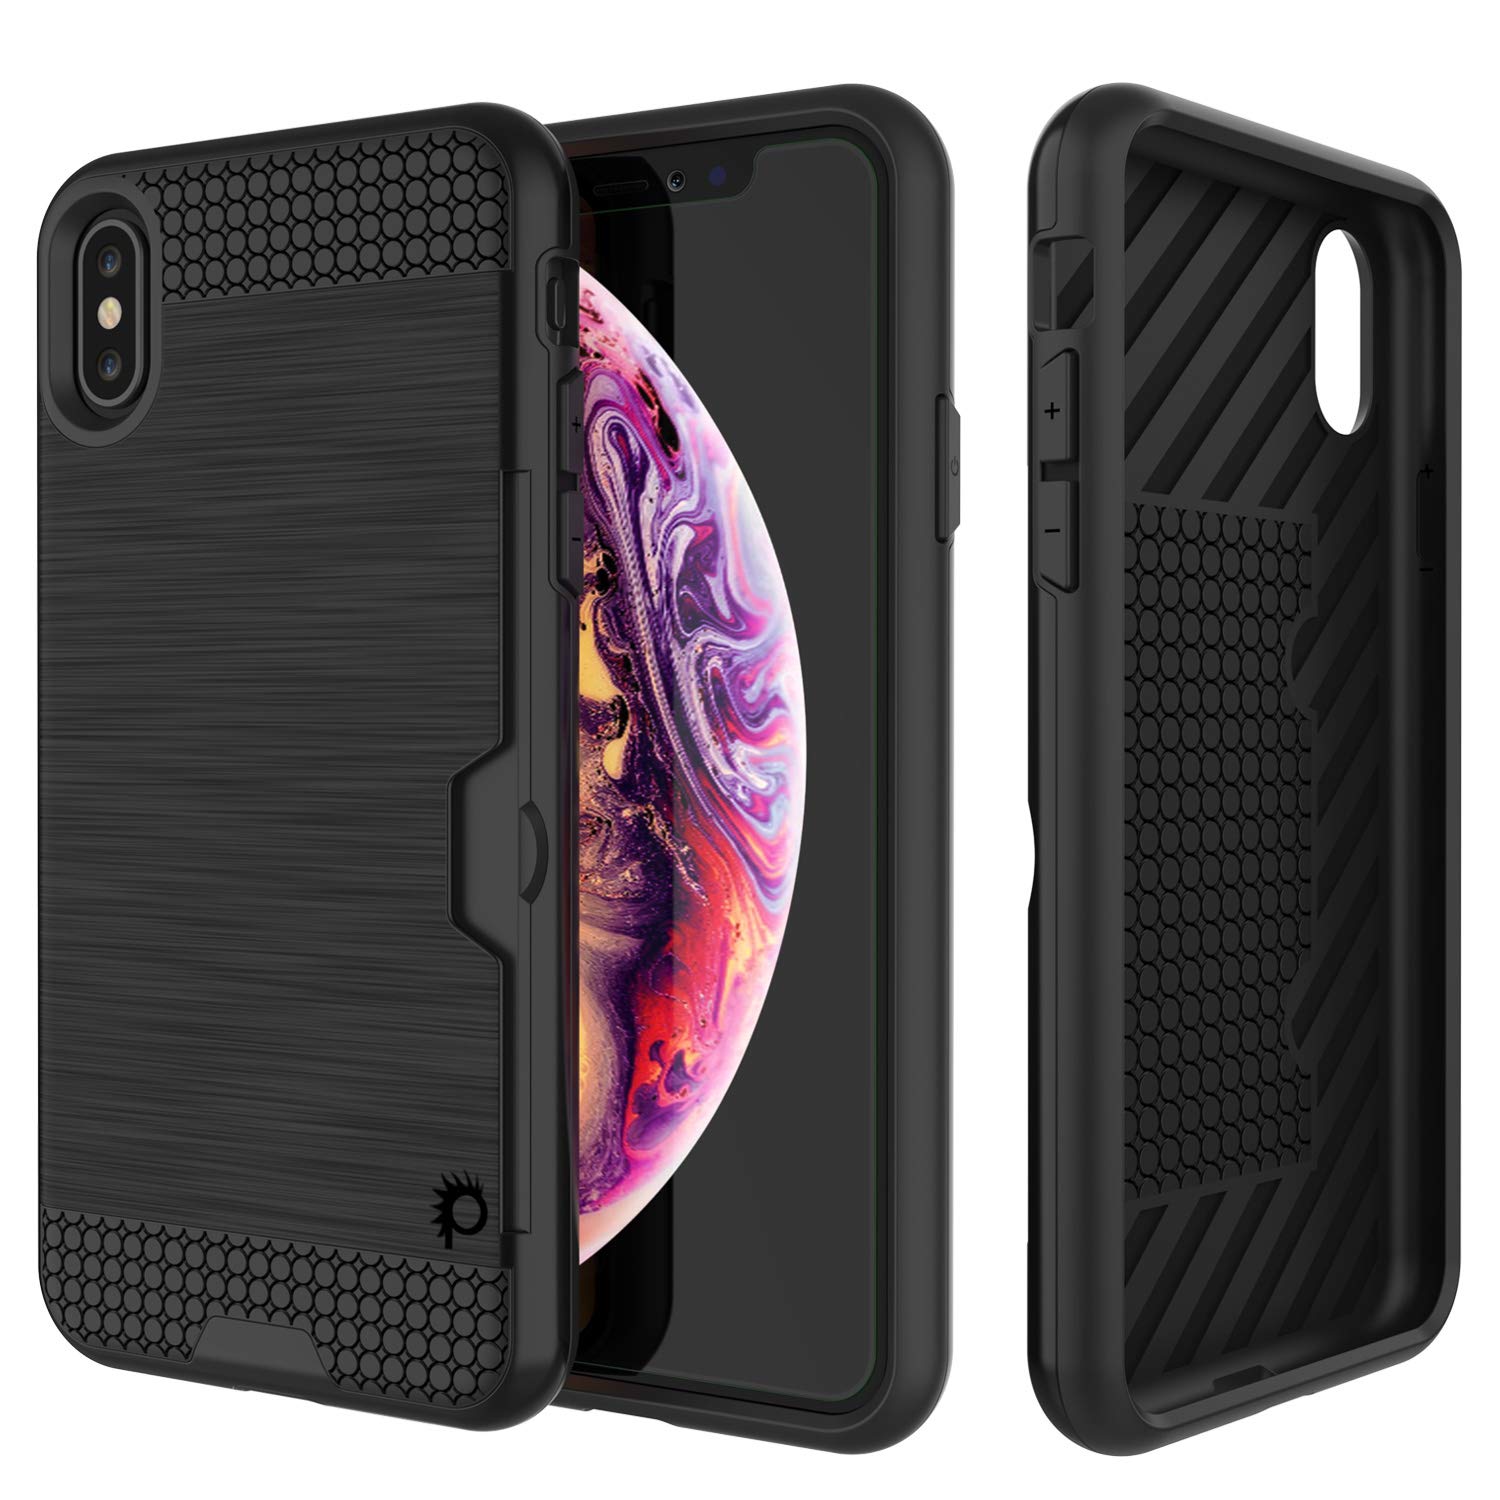 Dteck iPhone Xs Max Case, Dual Layer Full Body Shockproof Protection Case Double Sides Tempered Glass Cover Flexible TPU Bumper for iPhone Xs Max